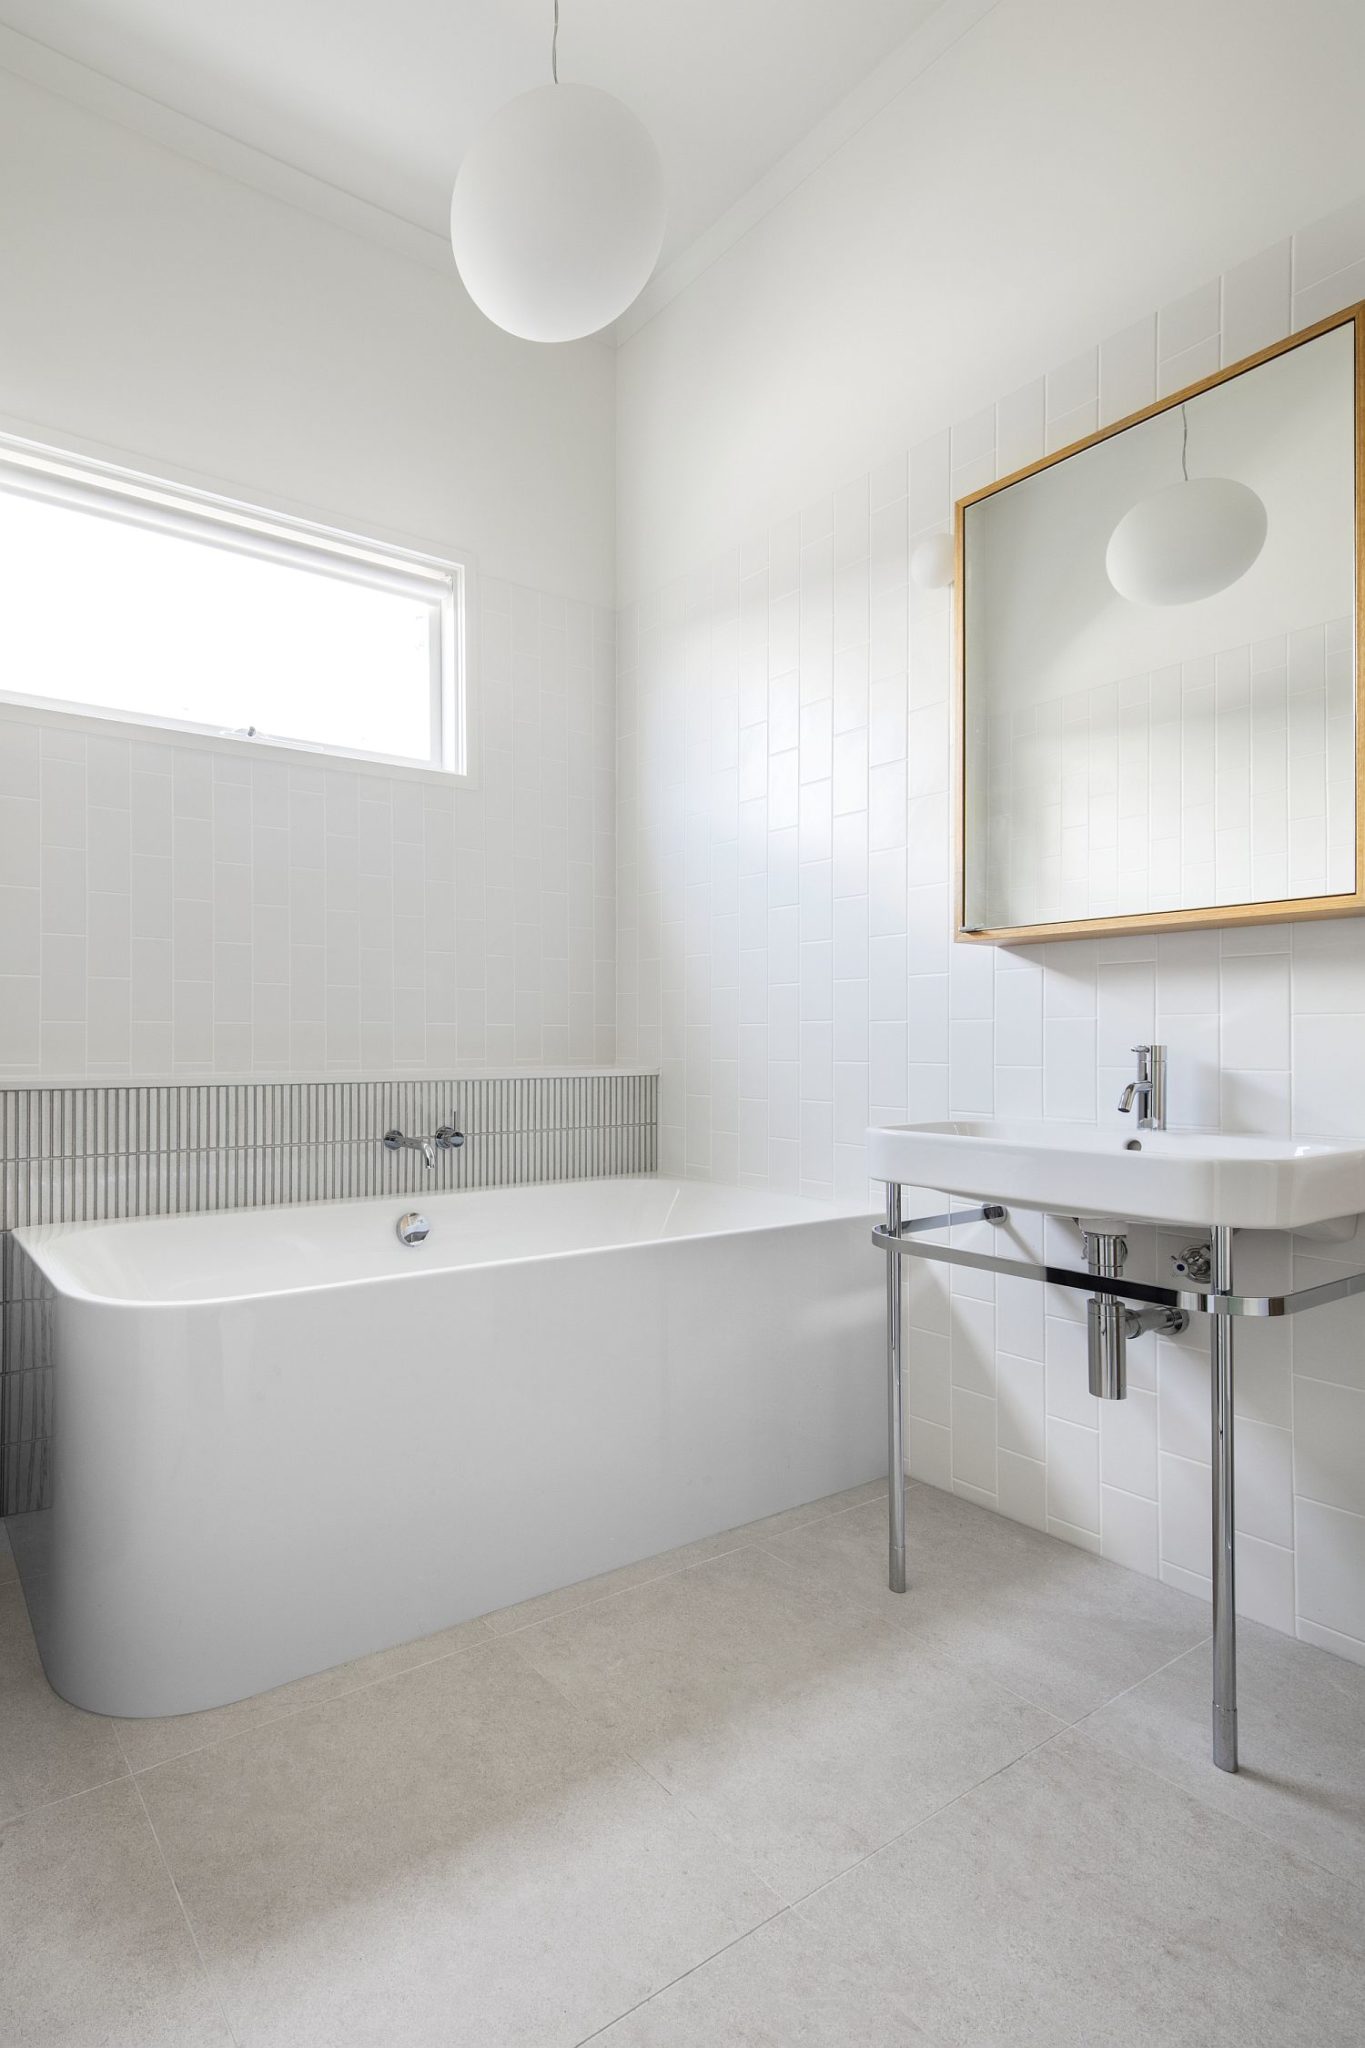 Contemporary-bathroom-in-white-with-timber-accents